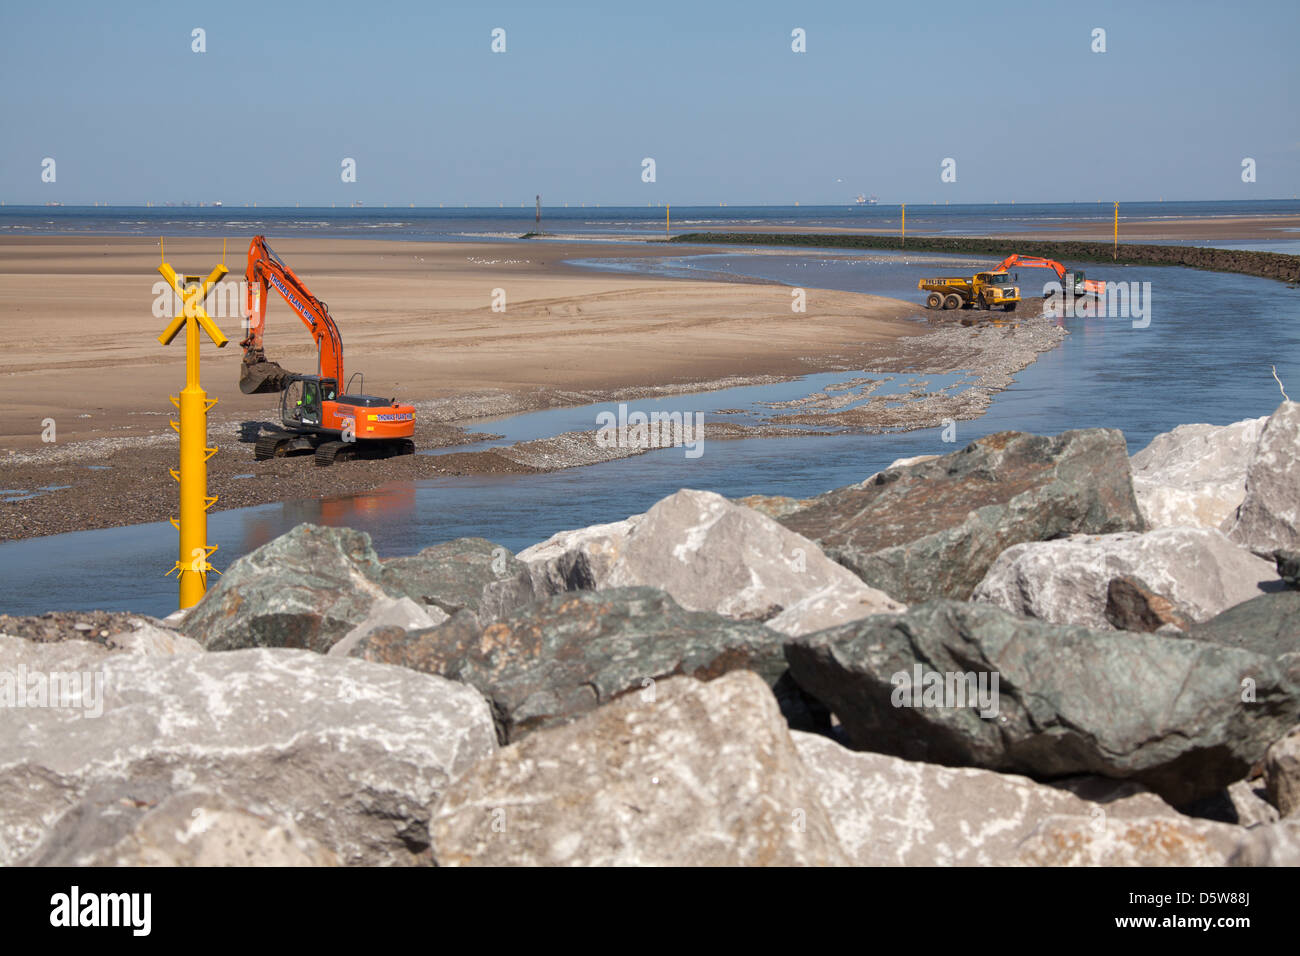 The Wales Coastal Path in North Wales. Excavation works on the River Clwyd at Rhyl Harbour. Stock Photo